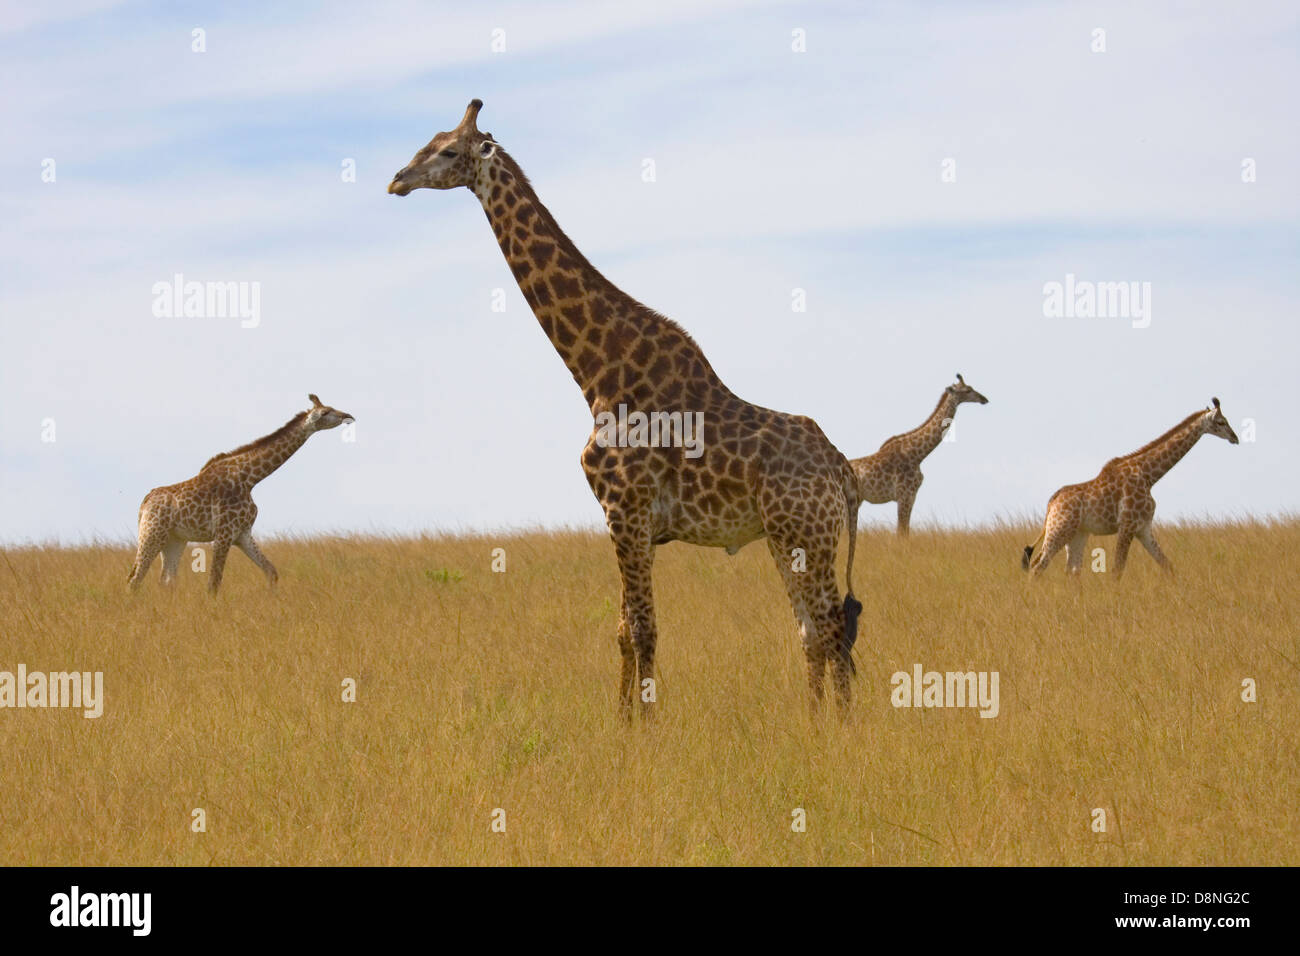 Four giraffes standing on the plains, Tala Game Reserve, South Africa. Stock Photo